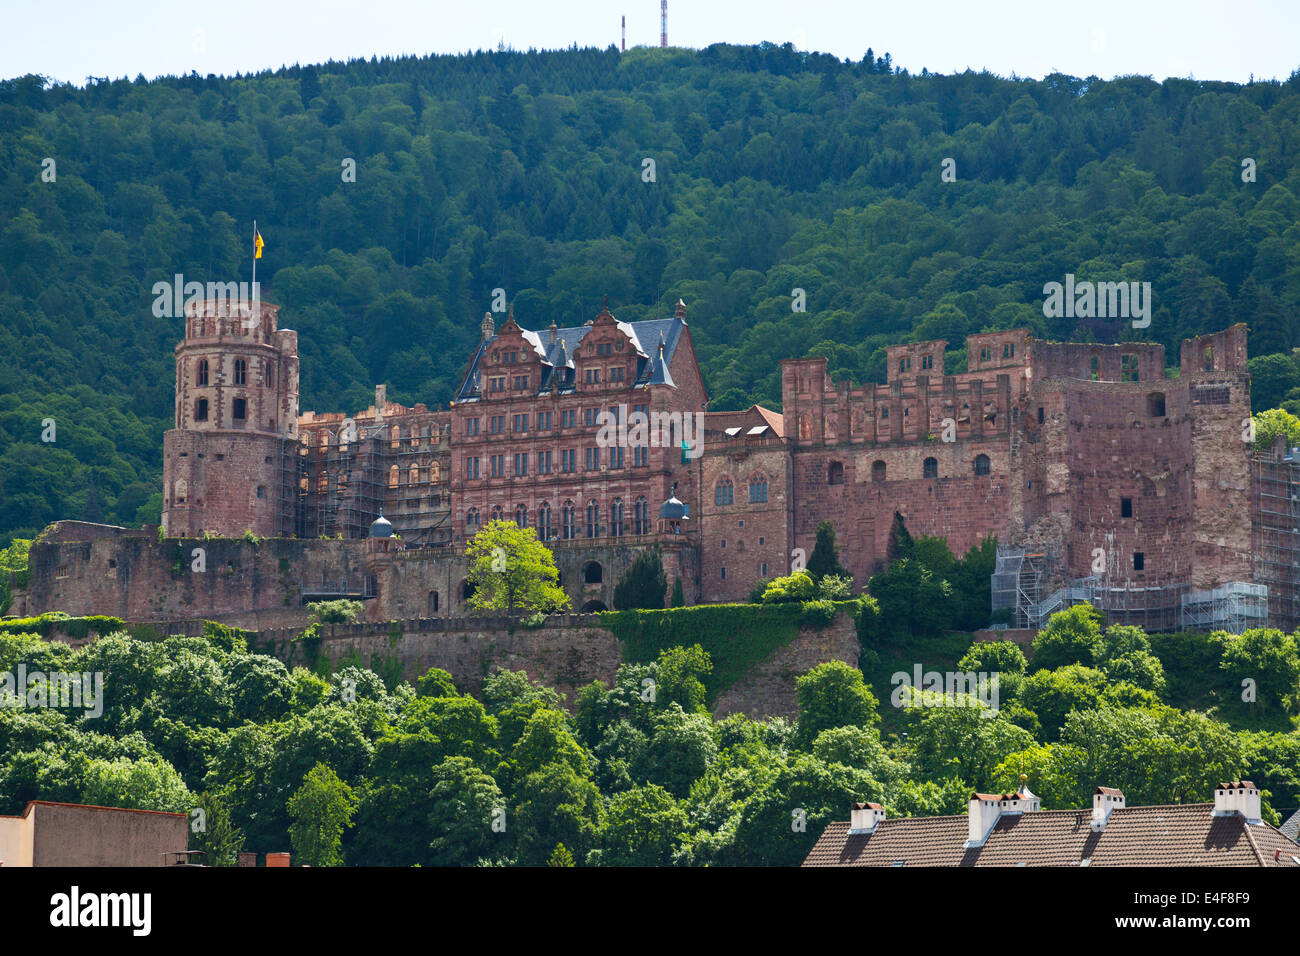 View onto the Castle in Heidelberg, Germany Stock Photo